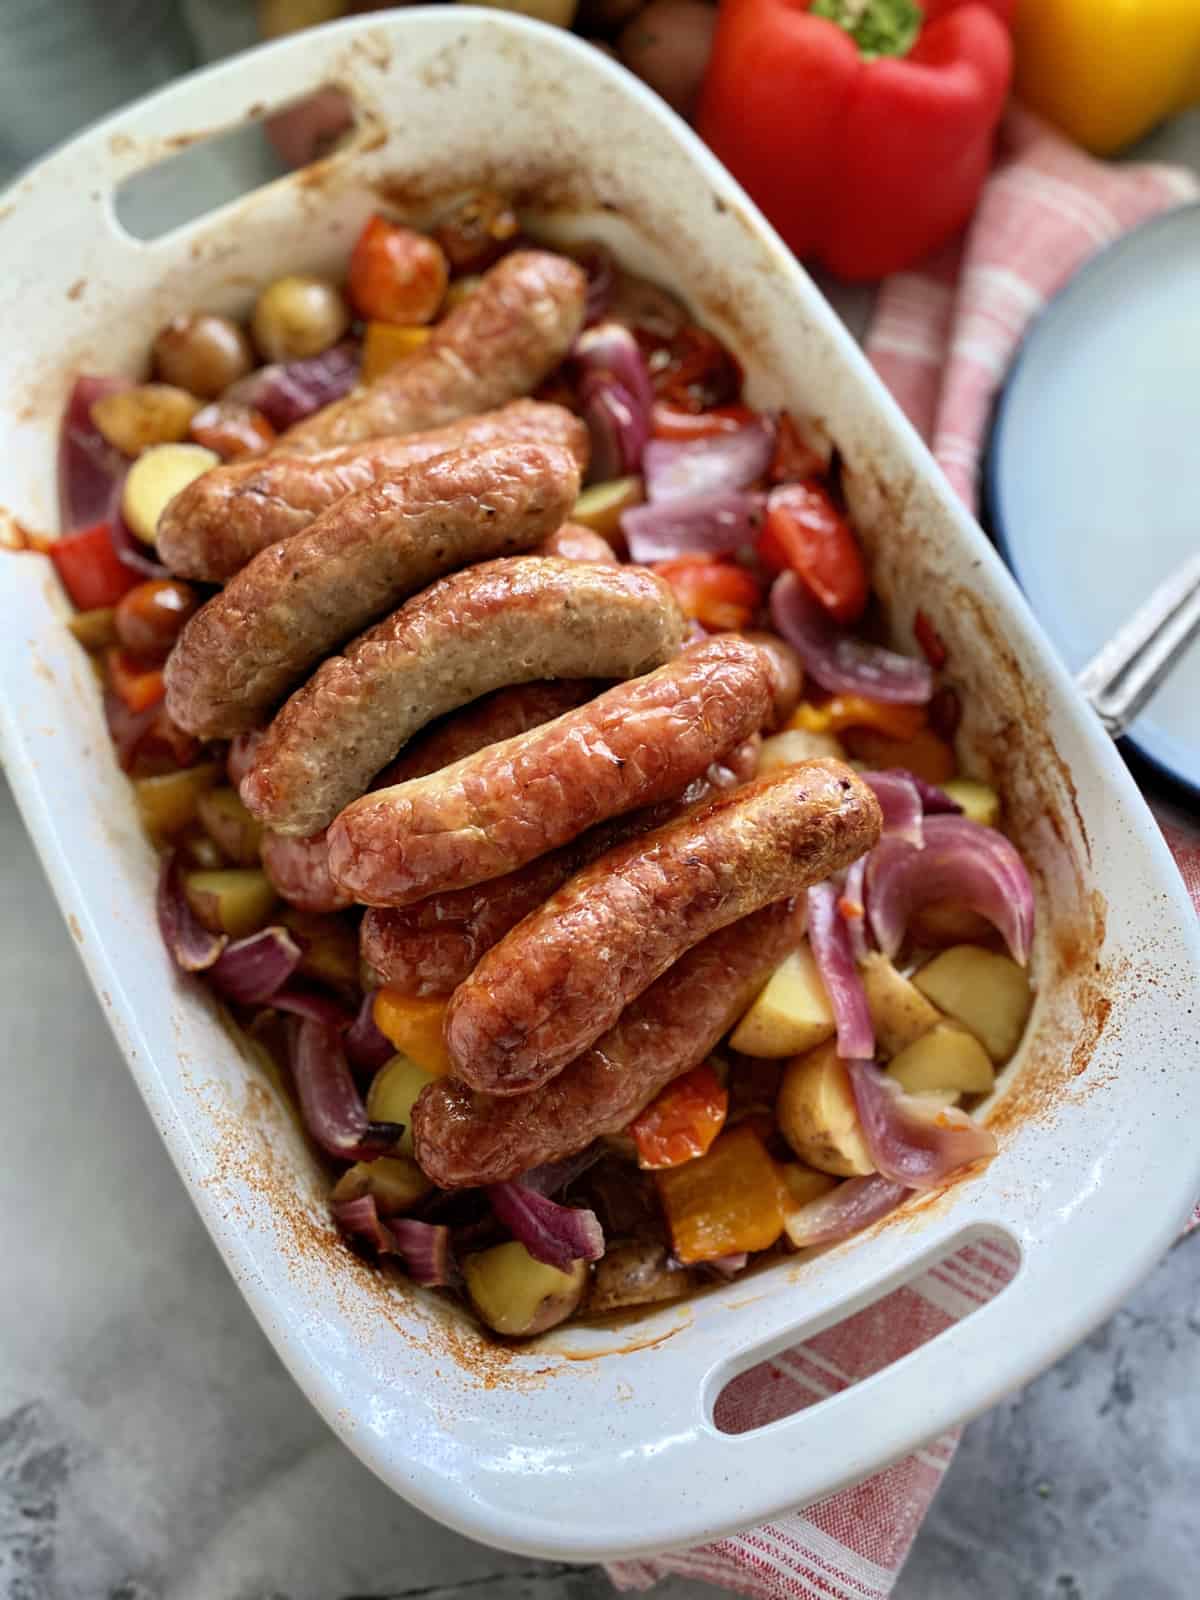 White casserole dish with roasted Italian sausage nestled on a bed of vegetables.